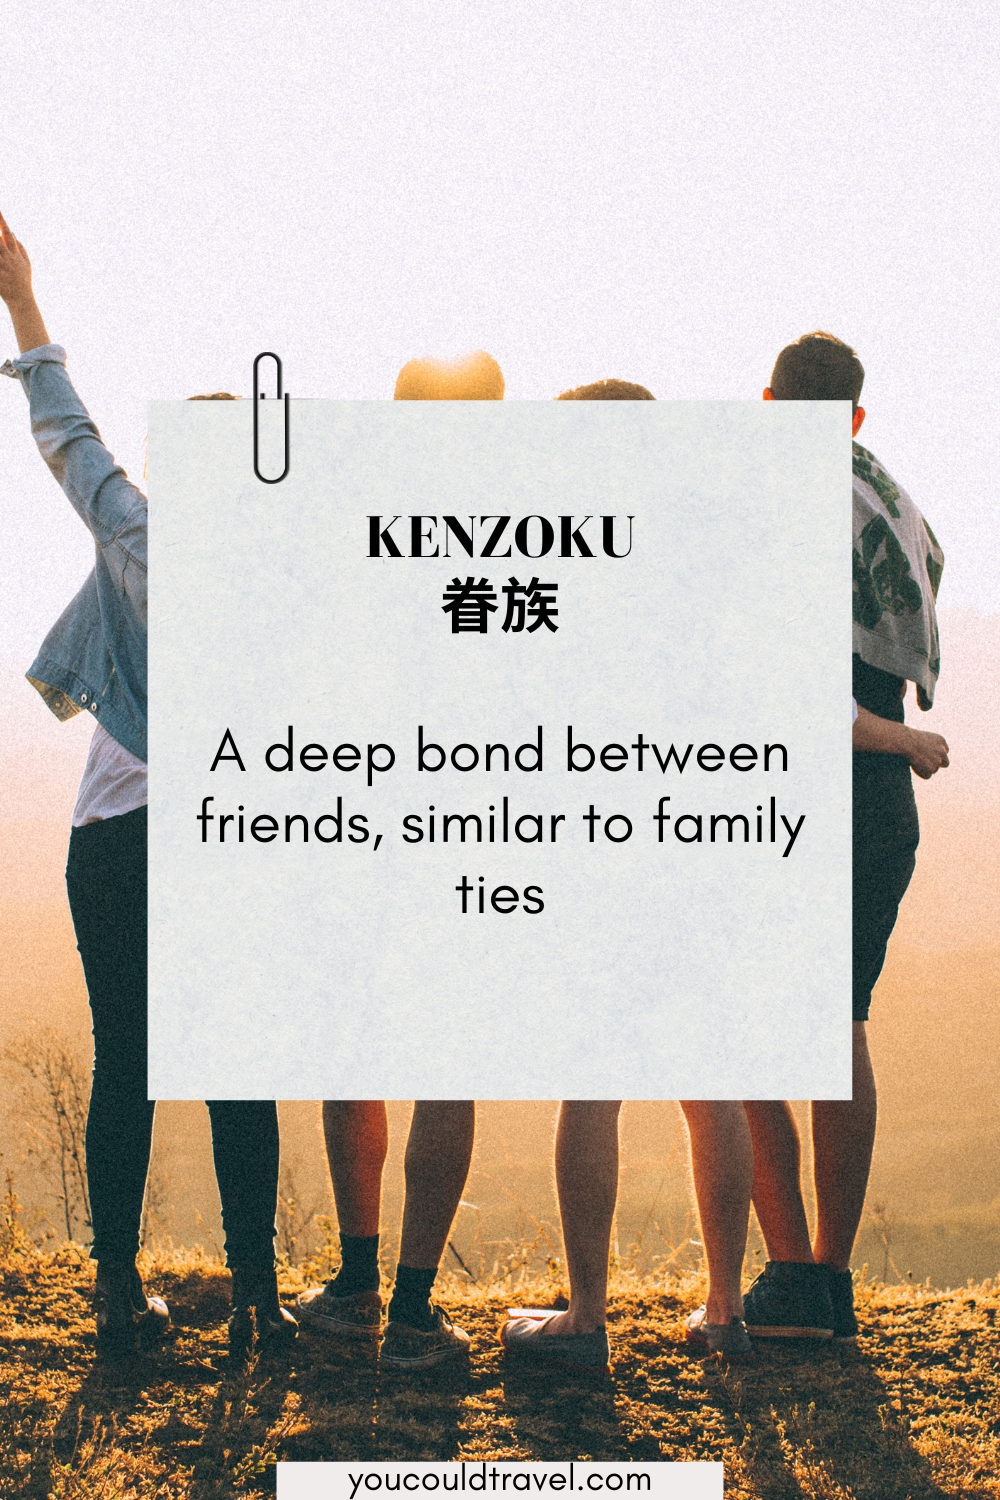 Kenzoku - The Japanese word for a deep connection